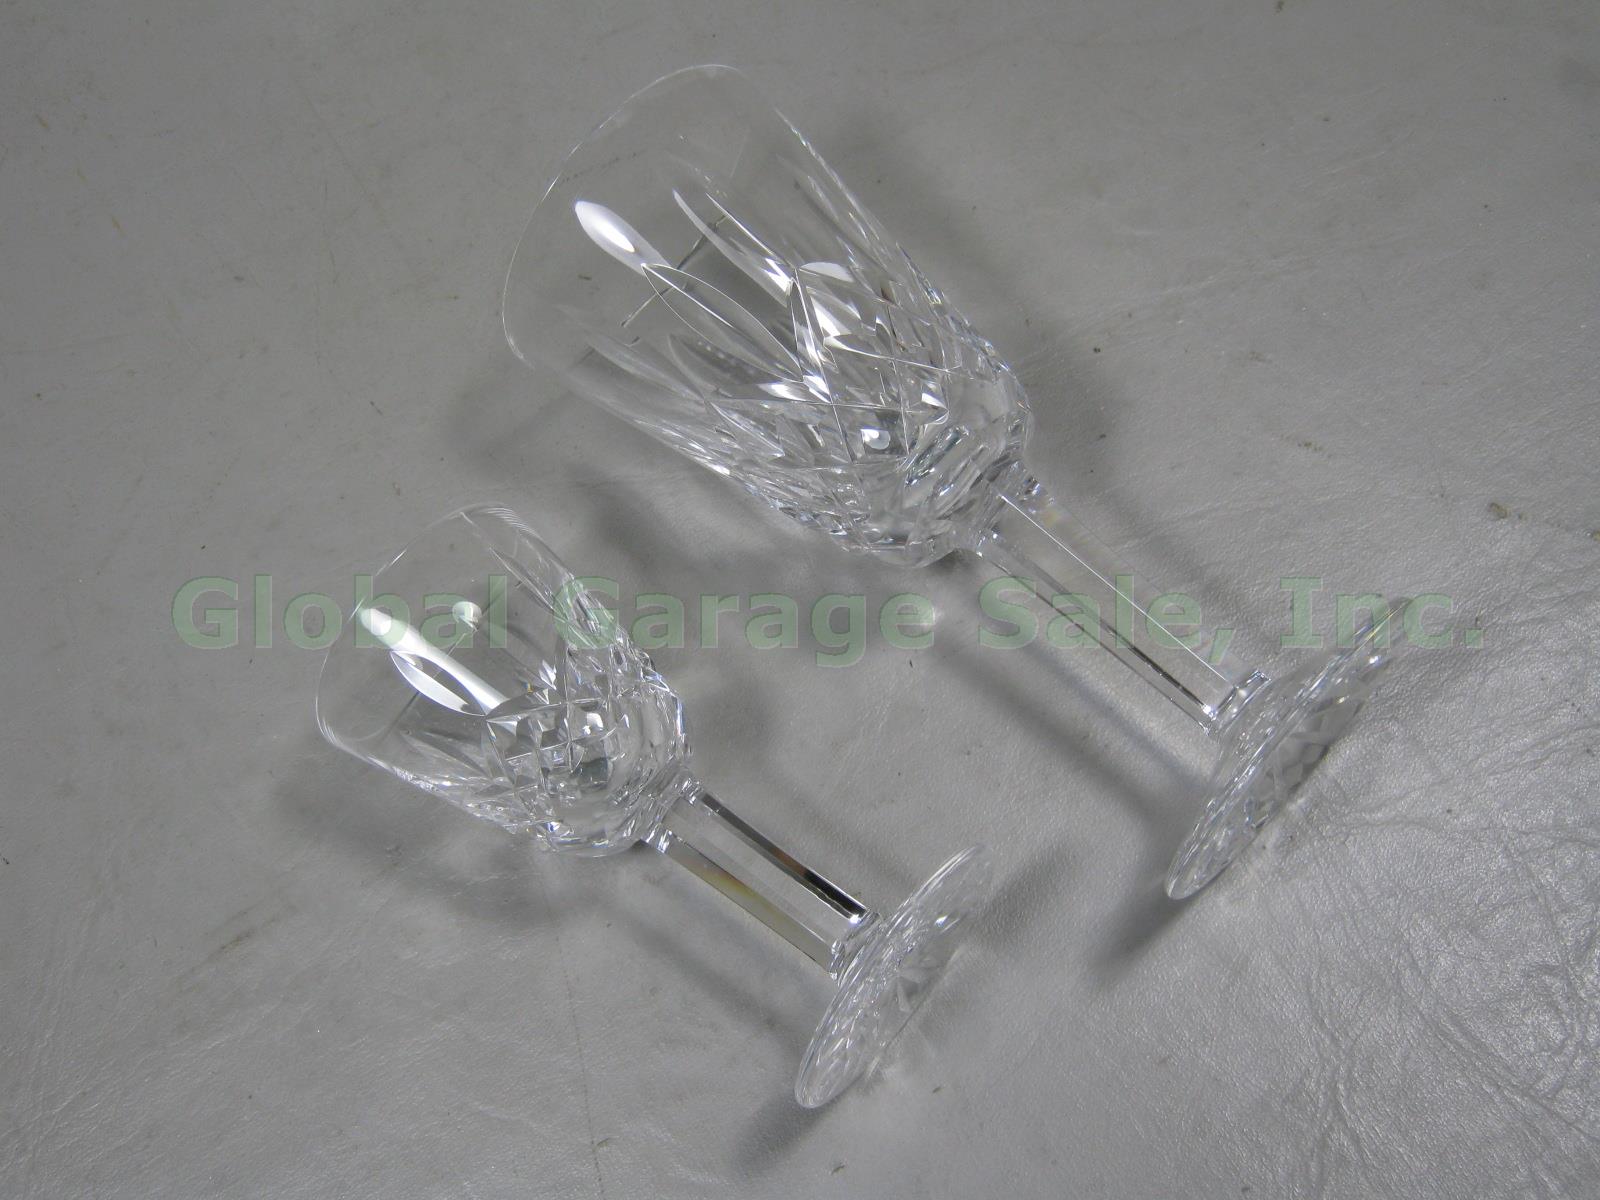 Waterford Crystal Lismore 2 Sherry + 8 Cordial Glasses Original Owner Bought New 1